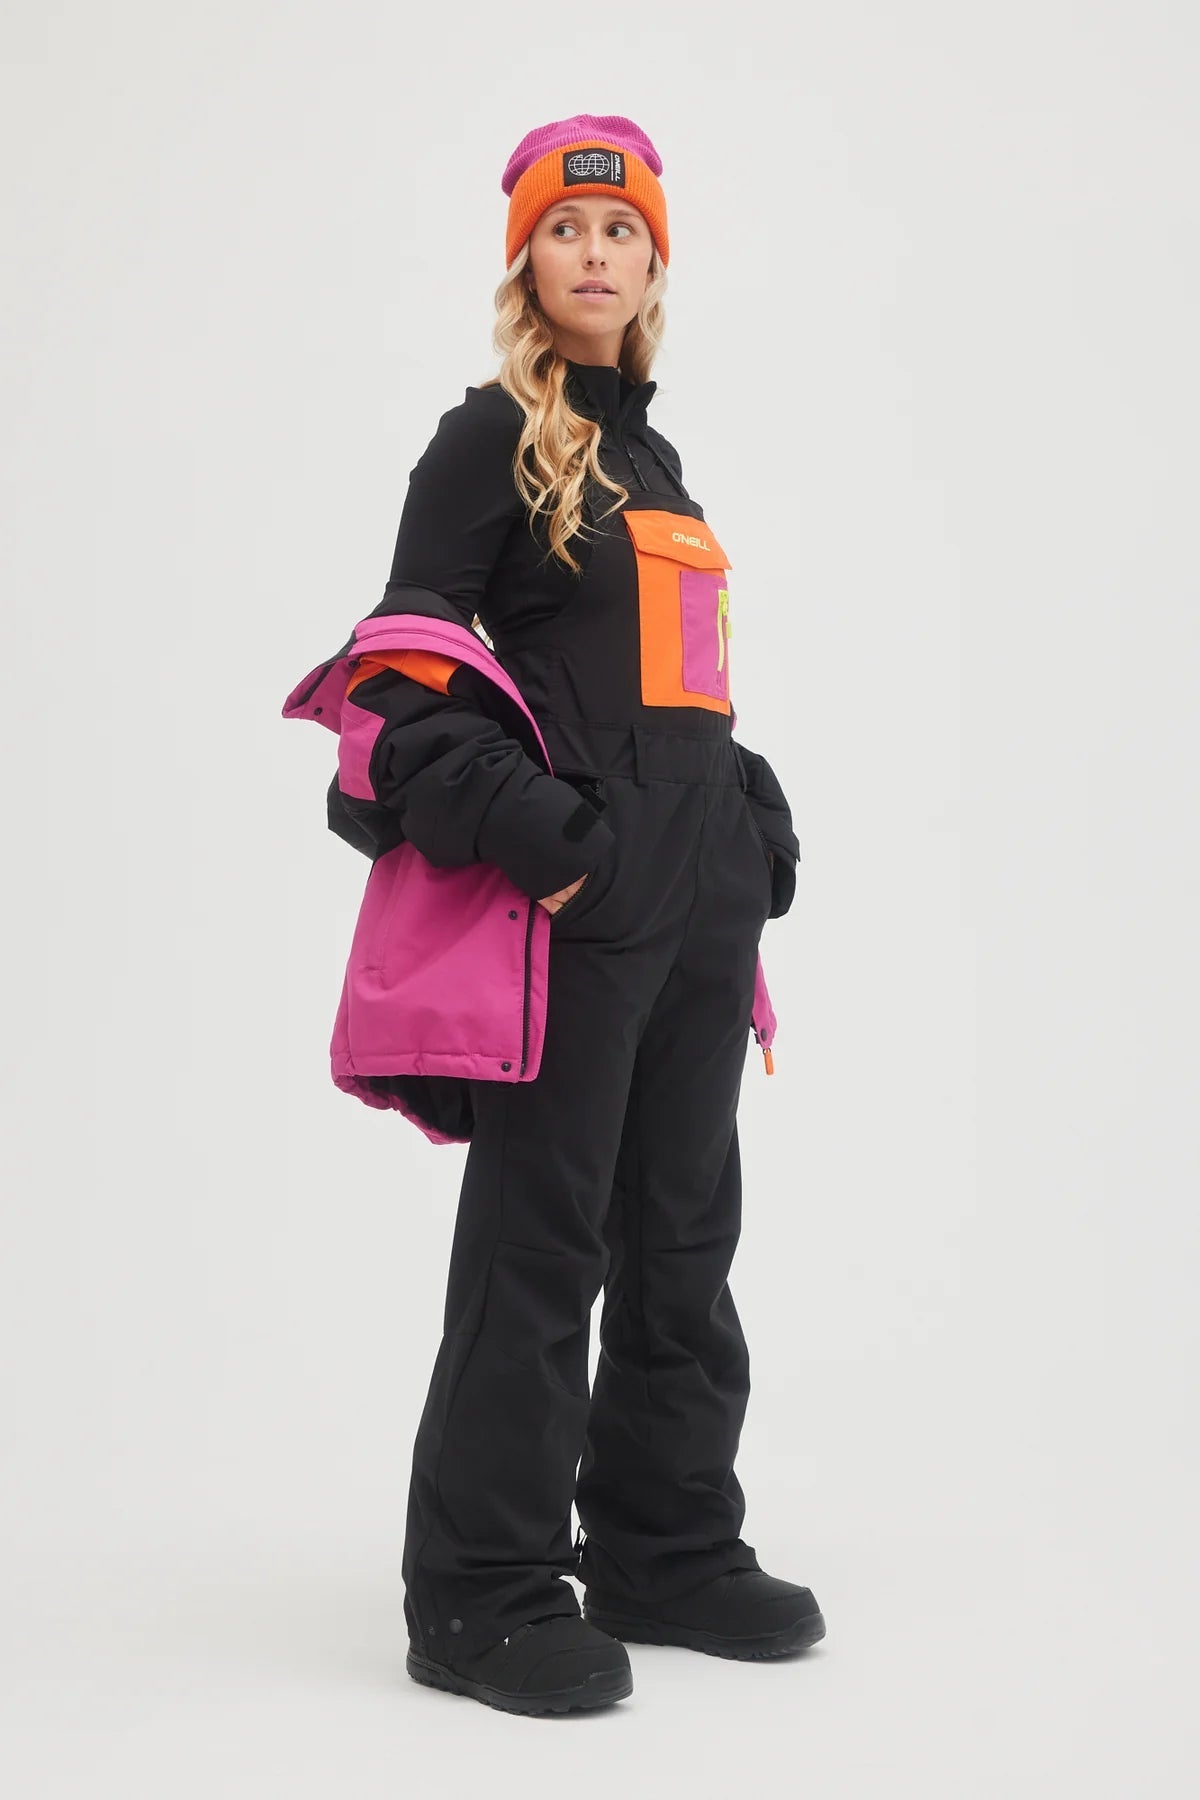 O'Neill O'Riginal Bib Women'S Ski Snowboard Pants-Sports Replay - Sports Excellence-Sports Replay - Sports Excellence